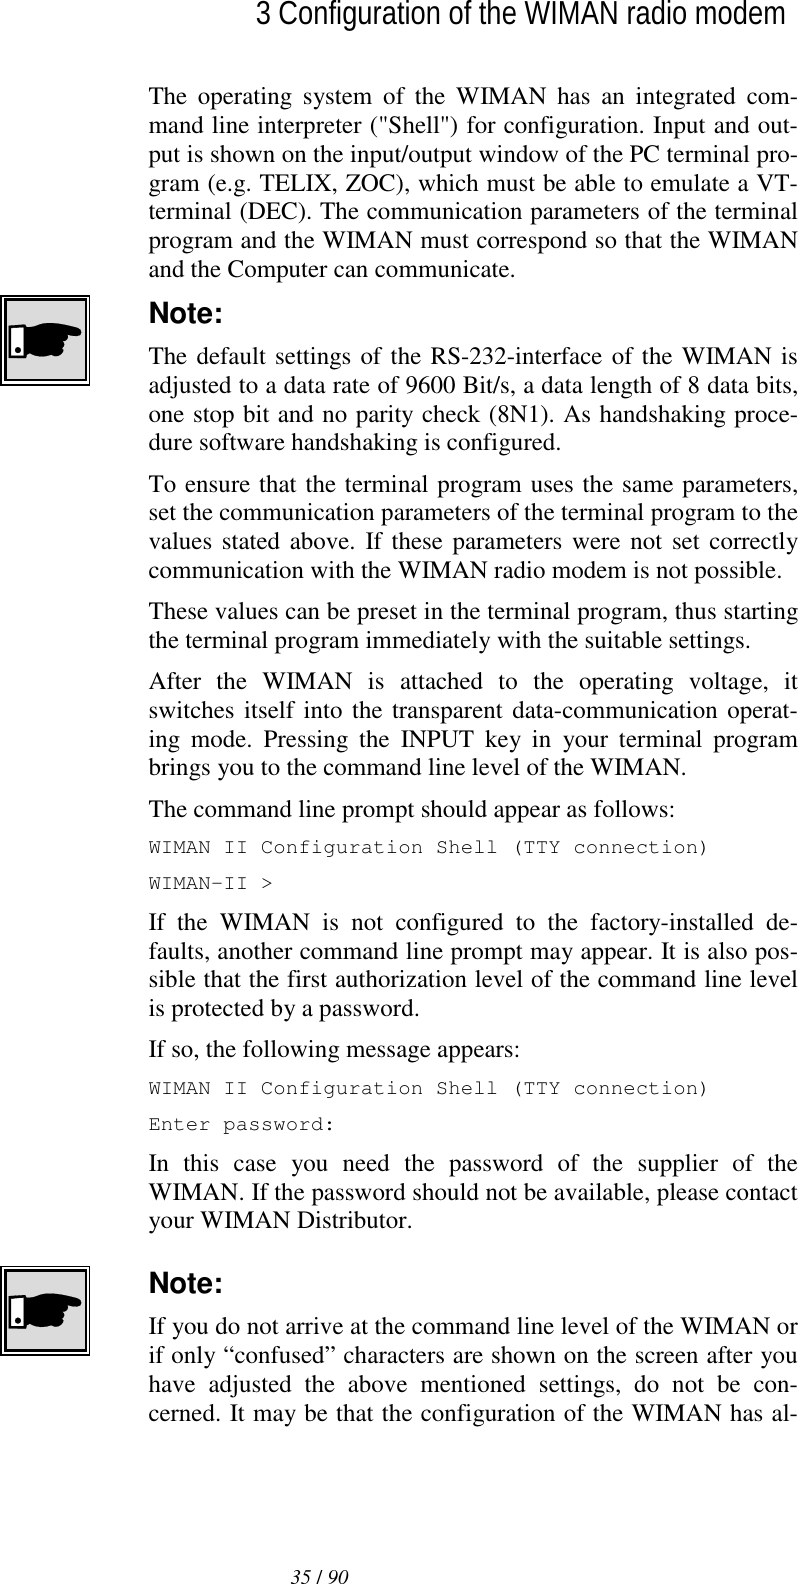   35 / 90l3 Configuration of the WIMAN radio modem The operating system of the WIMAN has an integrated com-mand line interpreter (&quot;Shell&quot;) for configuration. Input and out-put is shown on the input/output window of the PC terminal pro-gram (e.g. TELIX, ZOC), which must be able to emulate a VT-terminal (DEC). The communication parameters of the terminal program and the WIMAN must correspond so that the WIMAN and the Computer can communicate. Note: The default settings of the RS-232-interface of the WIMAN is adjusted to a data rate of 9600 Bit/s, a data length of 8 data bits, one stop bit and no parity check (8N1). As handshaking proce-dure software handshaking is configured. To ensure that the terminal program uses the same parameters, set the communication parameters of the terminal program to the values stated above. If these parameters were not set correctly communication with the WIMAN radio modem is not possible. These values can be preset in the terminal program, thus starting the terminal program immediately with the suitable settings. After the WIMAN is attached to the operating voltage, it switches itself into the transparent data-communication operat-ing mode. Pressing the INPUT key in your terminal program brings you to the command line level of the WIMAN. The command line prompt should appear as follows: WIMAN II Configuration Shell (TTY connection) WIMAN-II &gt; If the WIMAN is not configured to the factory-installed de-faults, another command line prompt may appear. It is also pos-sible that the first authorization level of the command line level is protected by a password. If so, the following message appears: WIMAN II Configuration Shell (TTY connection) Enter password: In this case you need the password of the supplier of the WIMAN. If the password should not be available, please contact your WIMAN Distributor. Note: If you do not arrive at the command line level of the WIMAN or if only “confused” characters are shown on the screen after you have adjusted the above mentioned settings, do not be con-cerned. It may be that the configuration of the WIMAN has al-